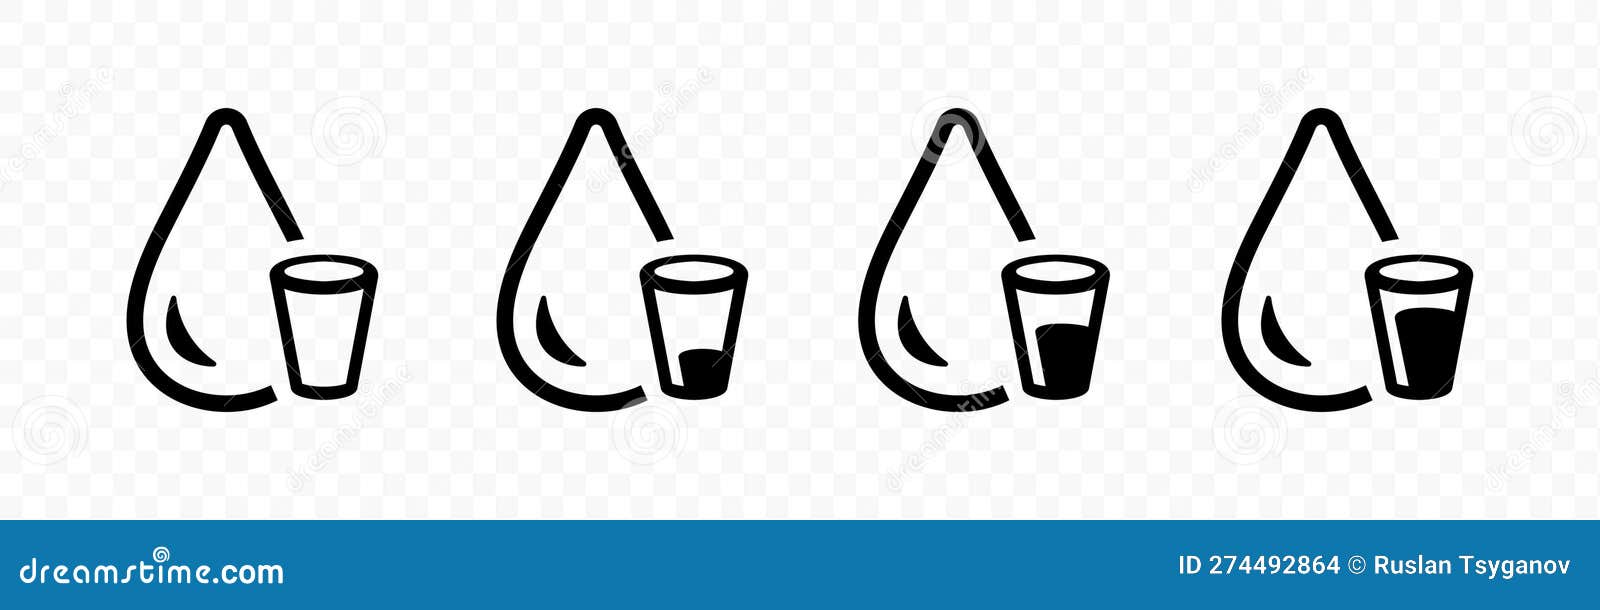 https://thumbs.dreamstime.com/z/drop-water-empty-full-filled-glass-liquid-vector-icon-icons-droplet-cup-274492864.jpg